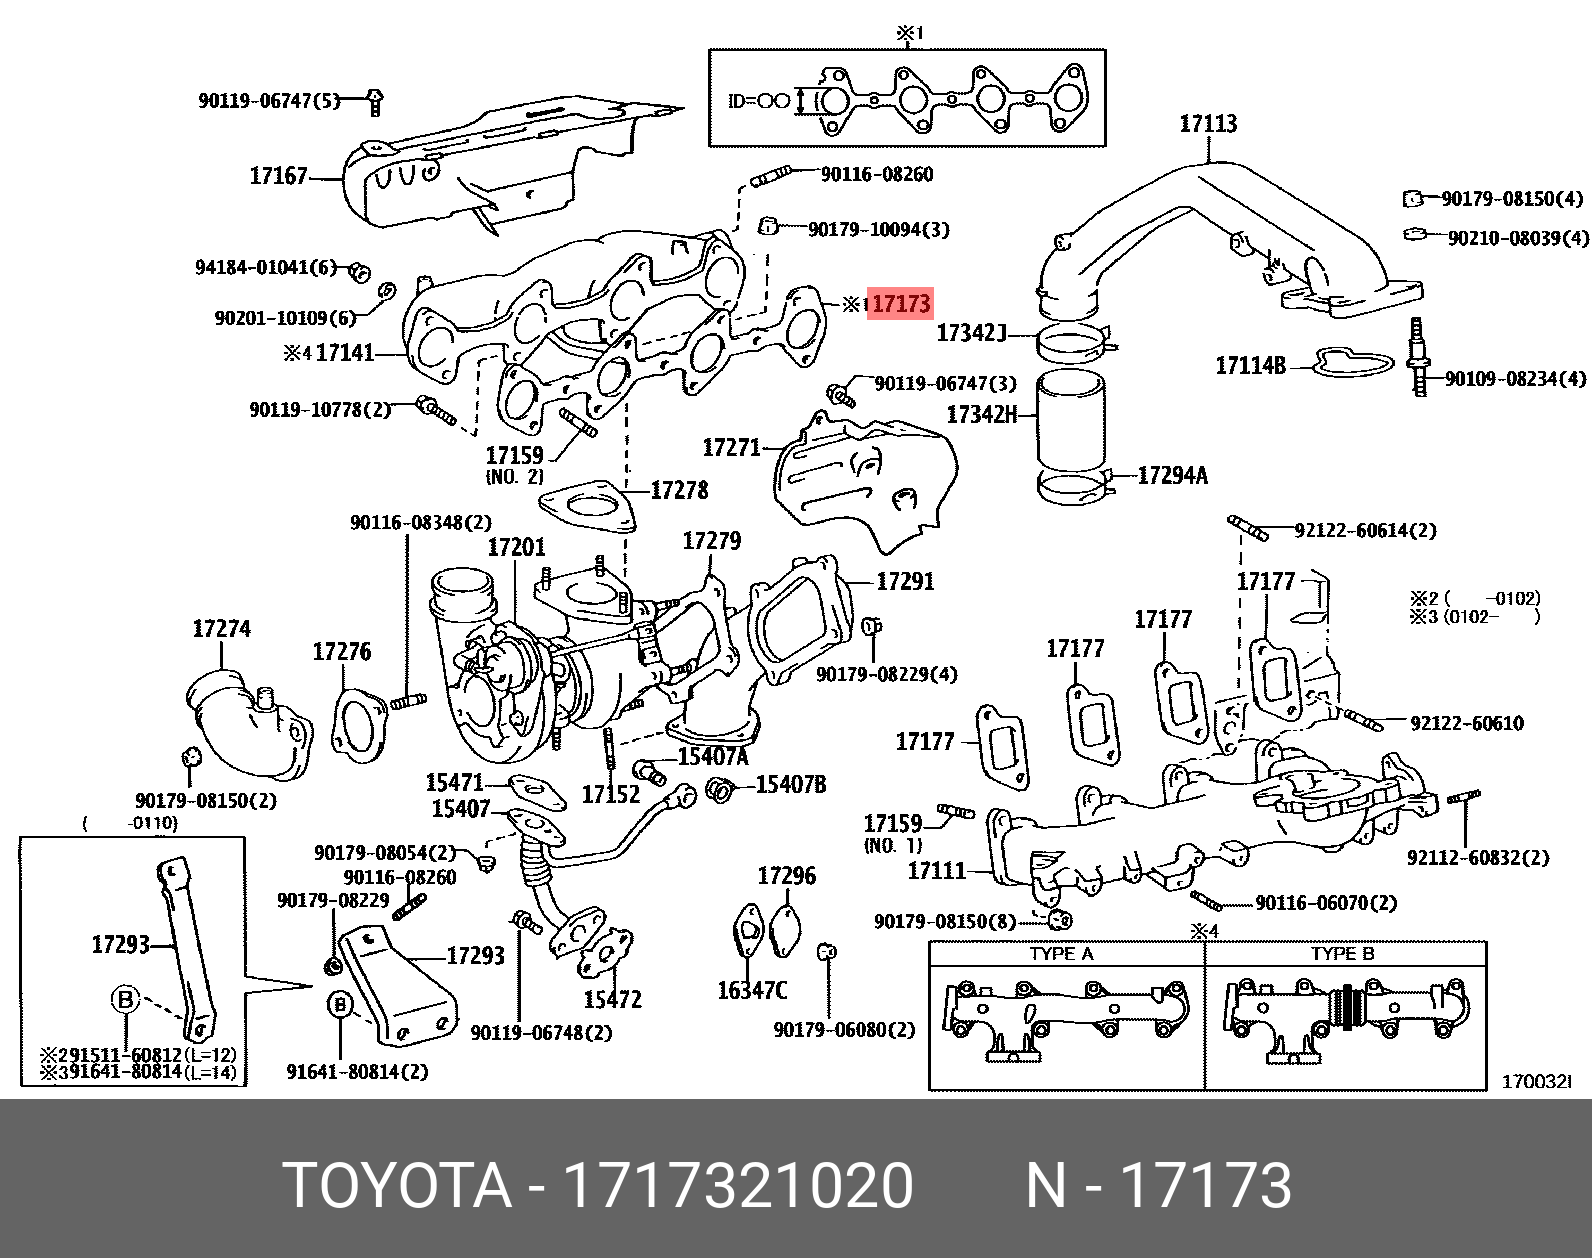 PRIUS 200308 - 201112, GASKET, EXHAUST MANIFOLD TO HEAD